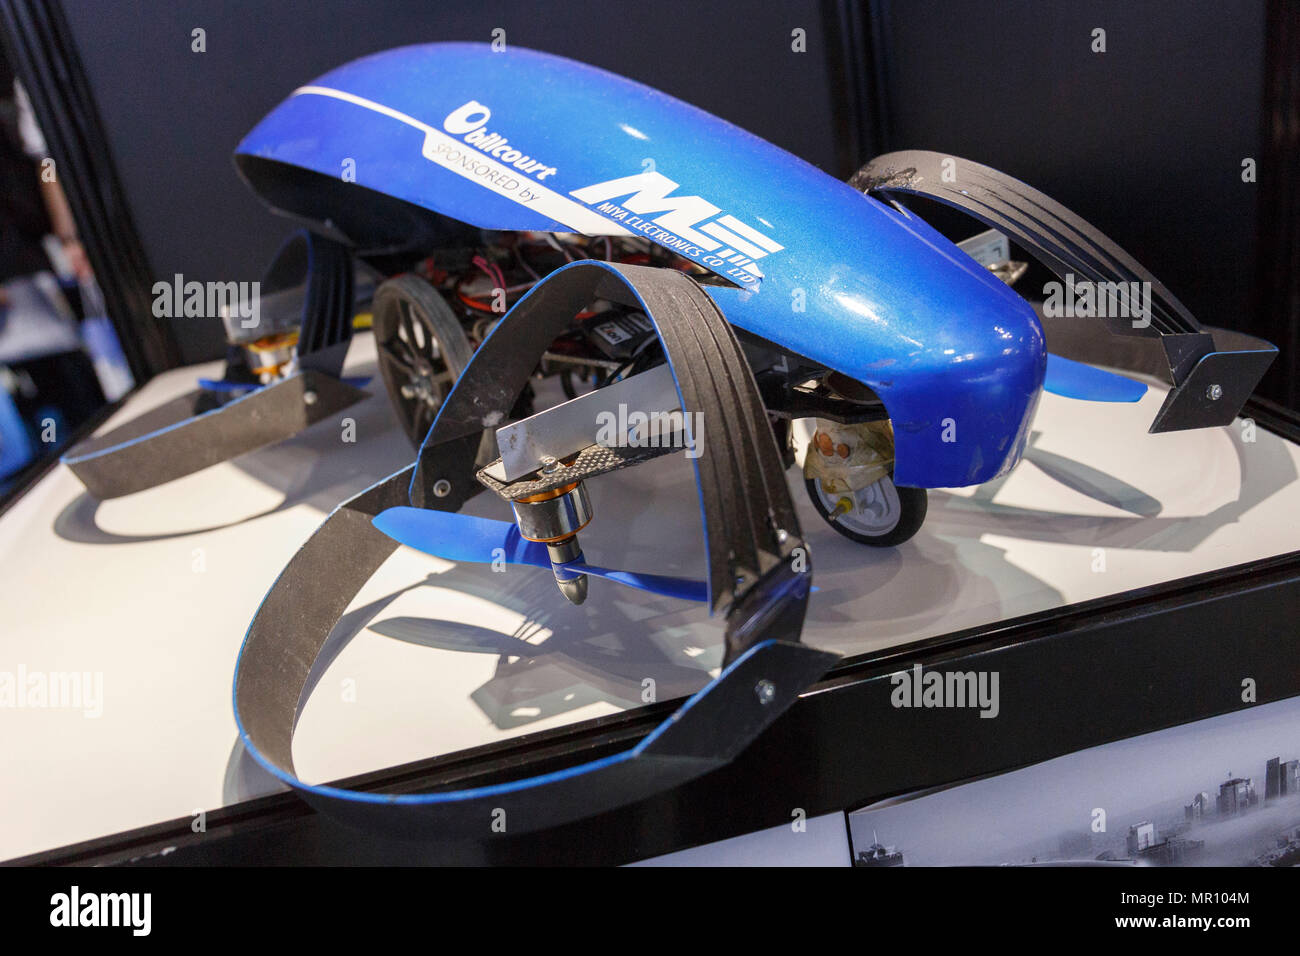 A scale model of a flying car prototype SkyDrive SD-00 on display at the Automotive Engineering Exposition 2018 Yokohama on May 25, 2018, in Yokohama, Japan. The annual event introduces the latest automotive technologies from 597 companies across 1,207 booths at Pacifico Yokohama. The exhibition runs from May 23 to 25. (Photo by Rodrigo Reyes Marin/AFLO) Stock Photo